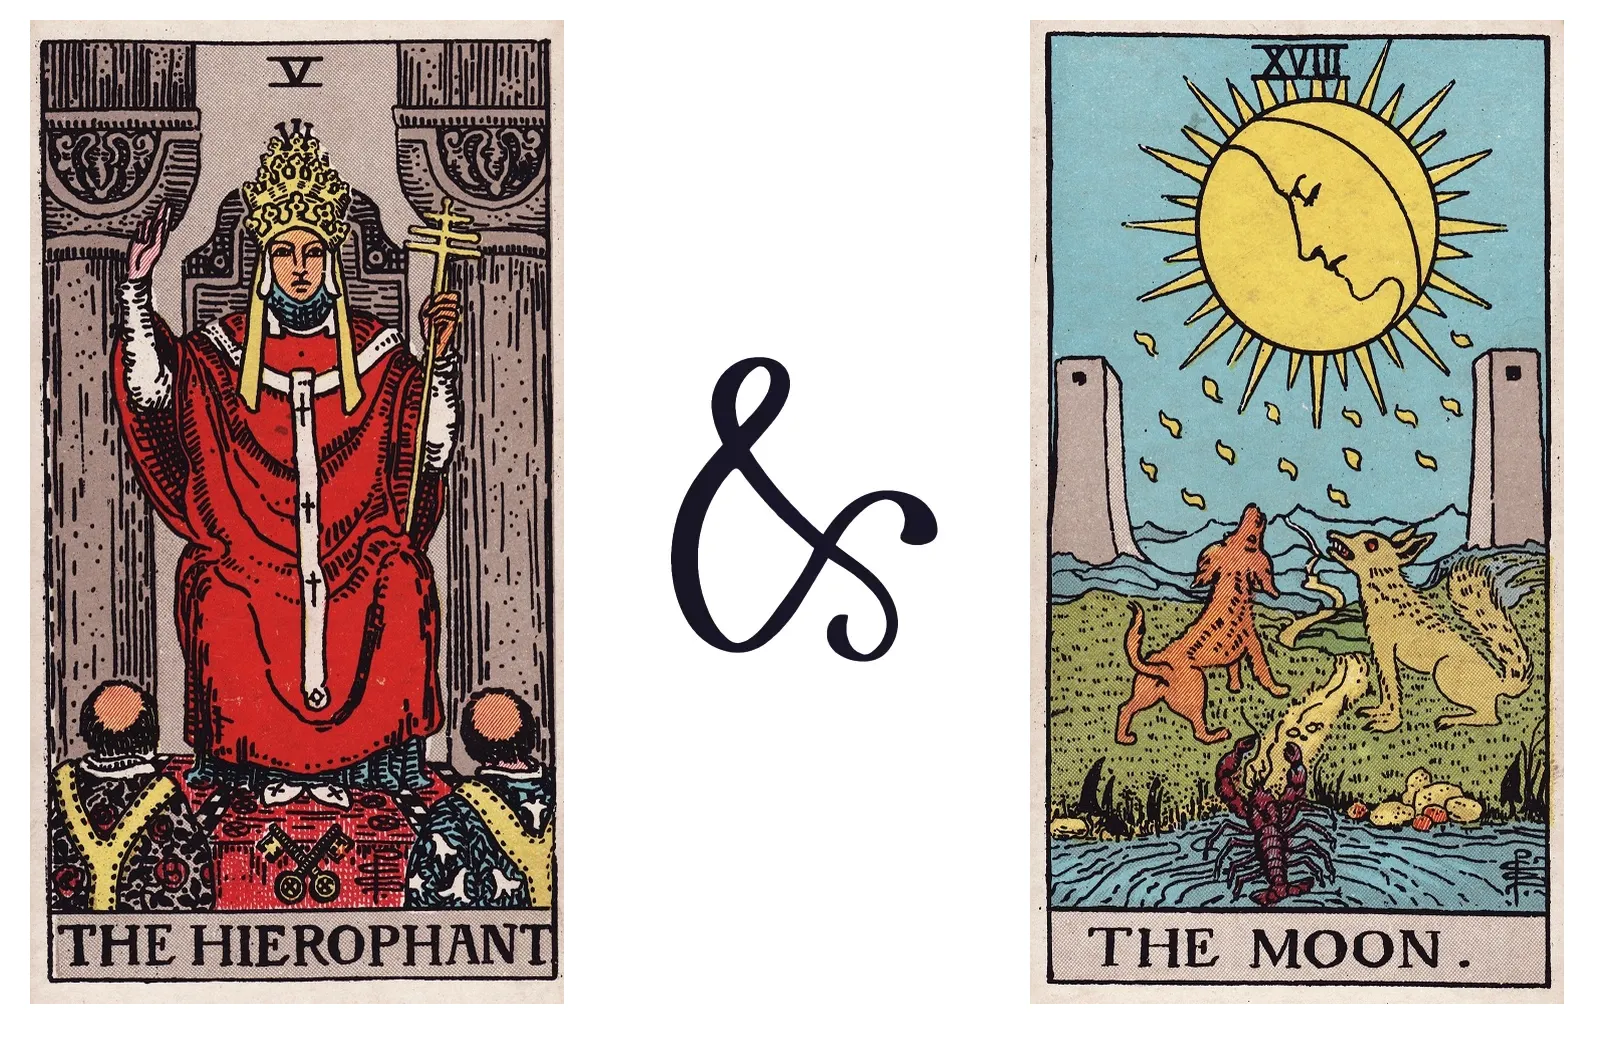 The Hierophant and The Moon